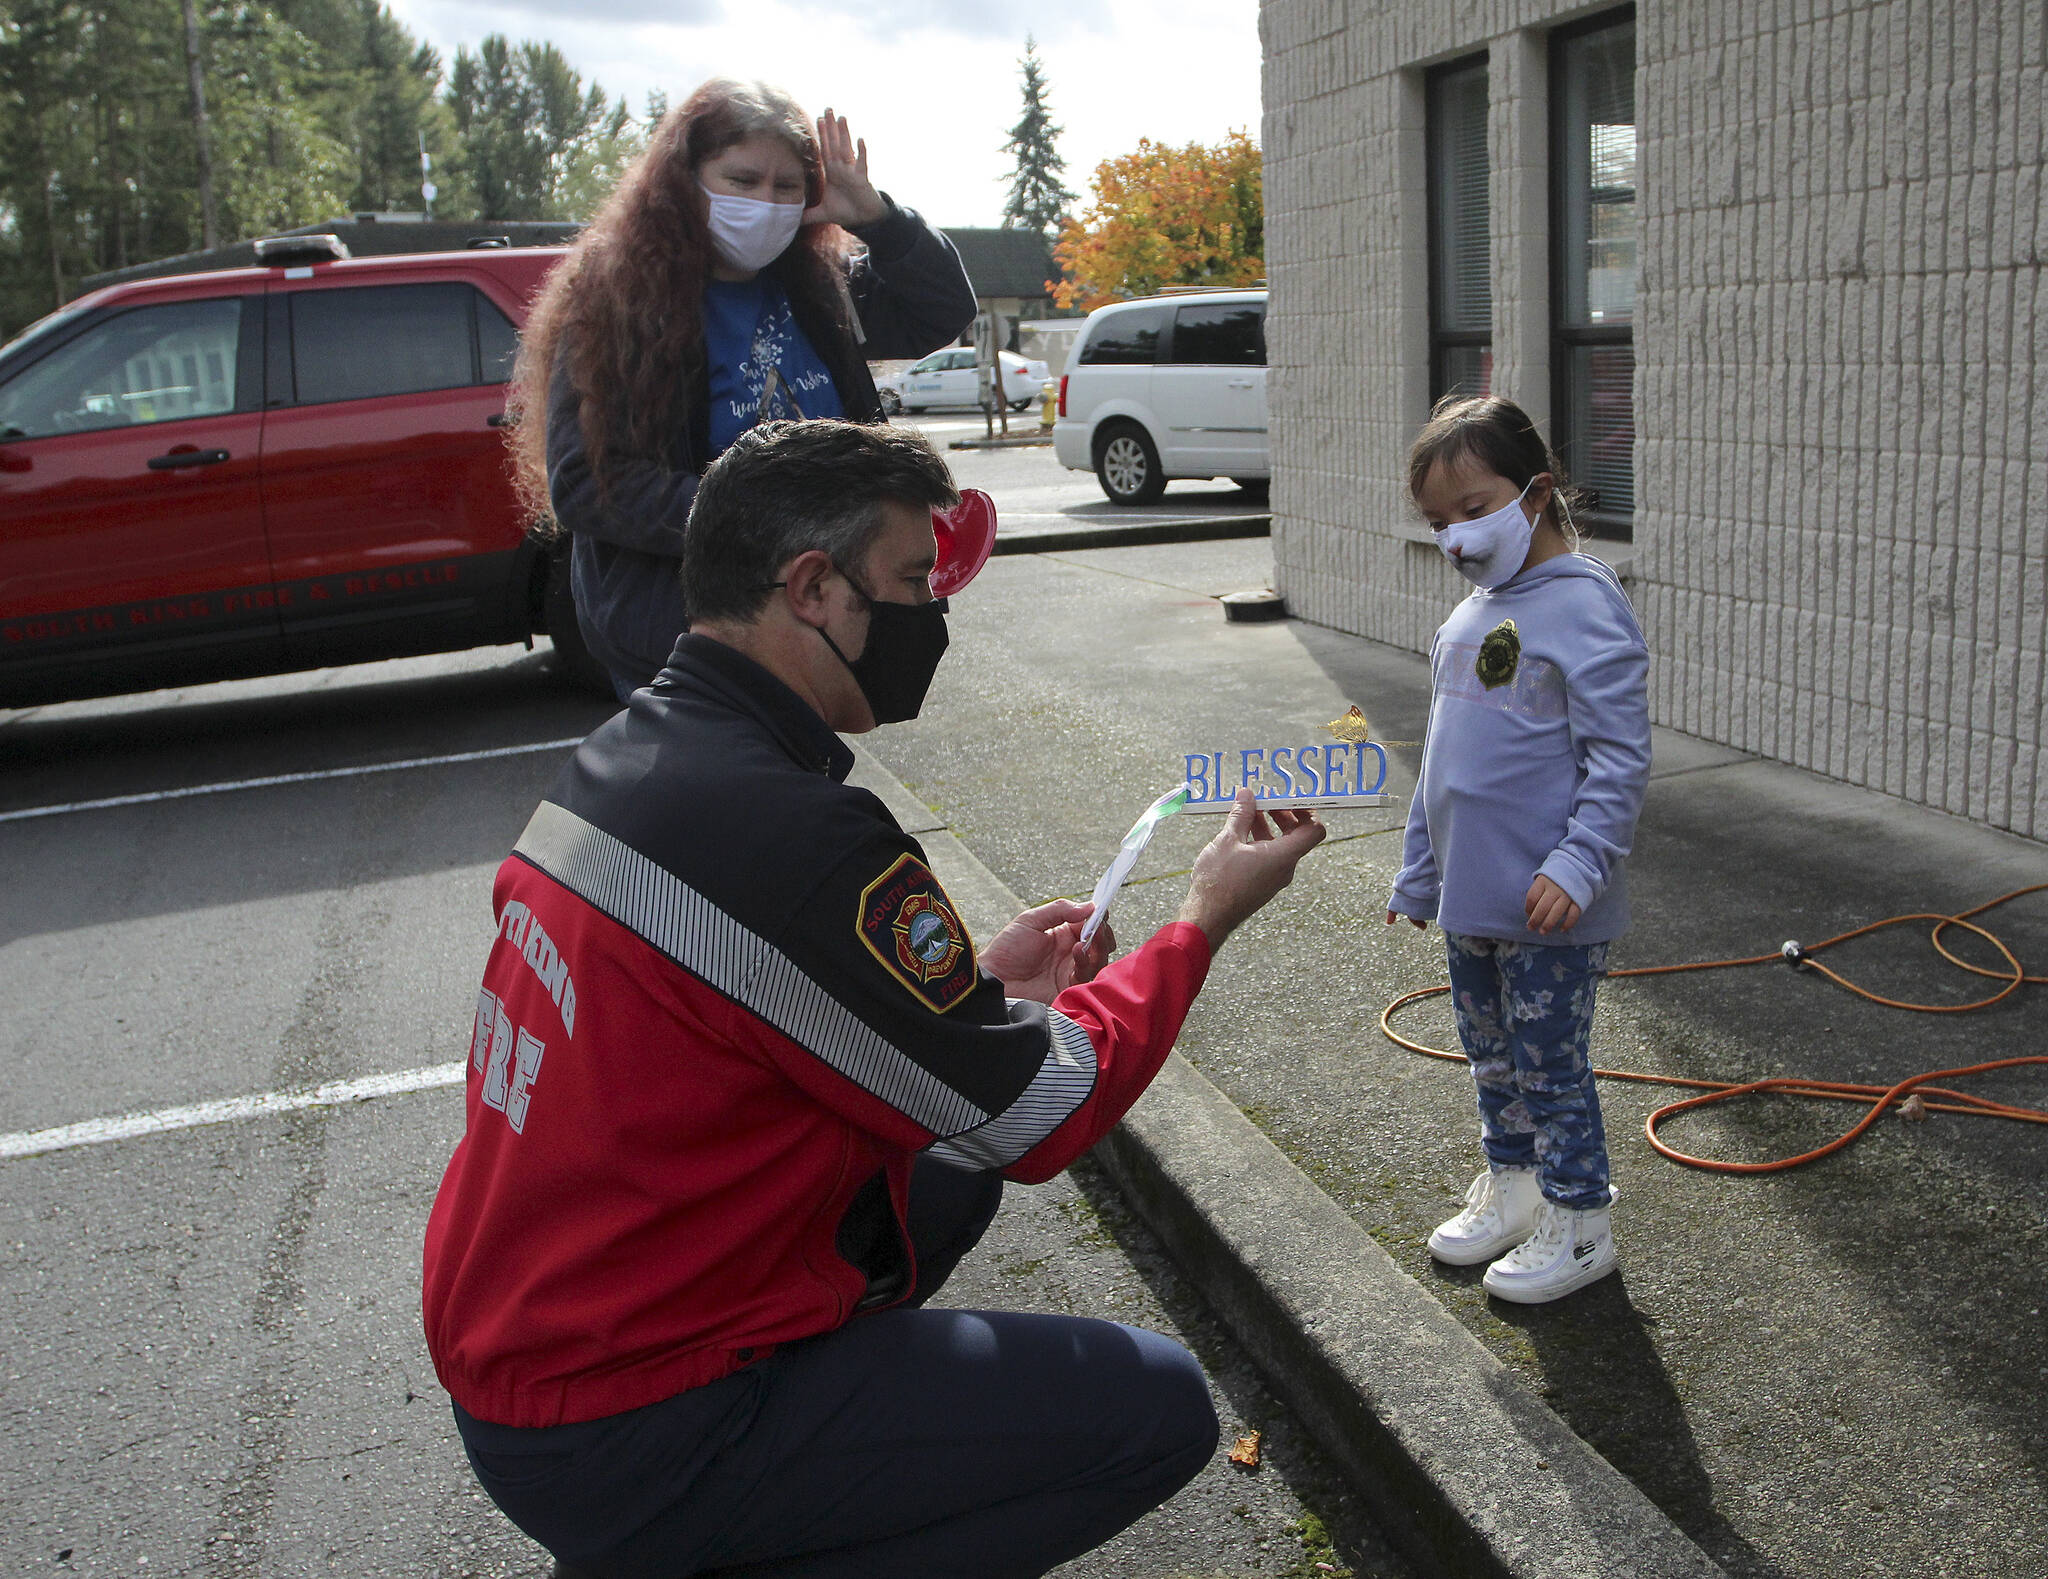 Throughout the year, Andrea and Arianna place signs around Federal Way to spread kindness and promote Down syndrome acceptance. Olivia Sullivan/the Mirror